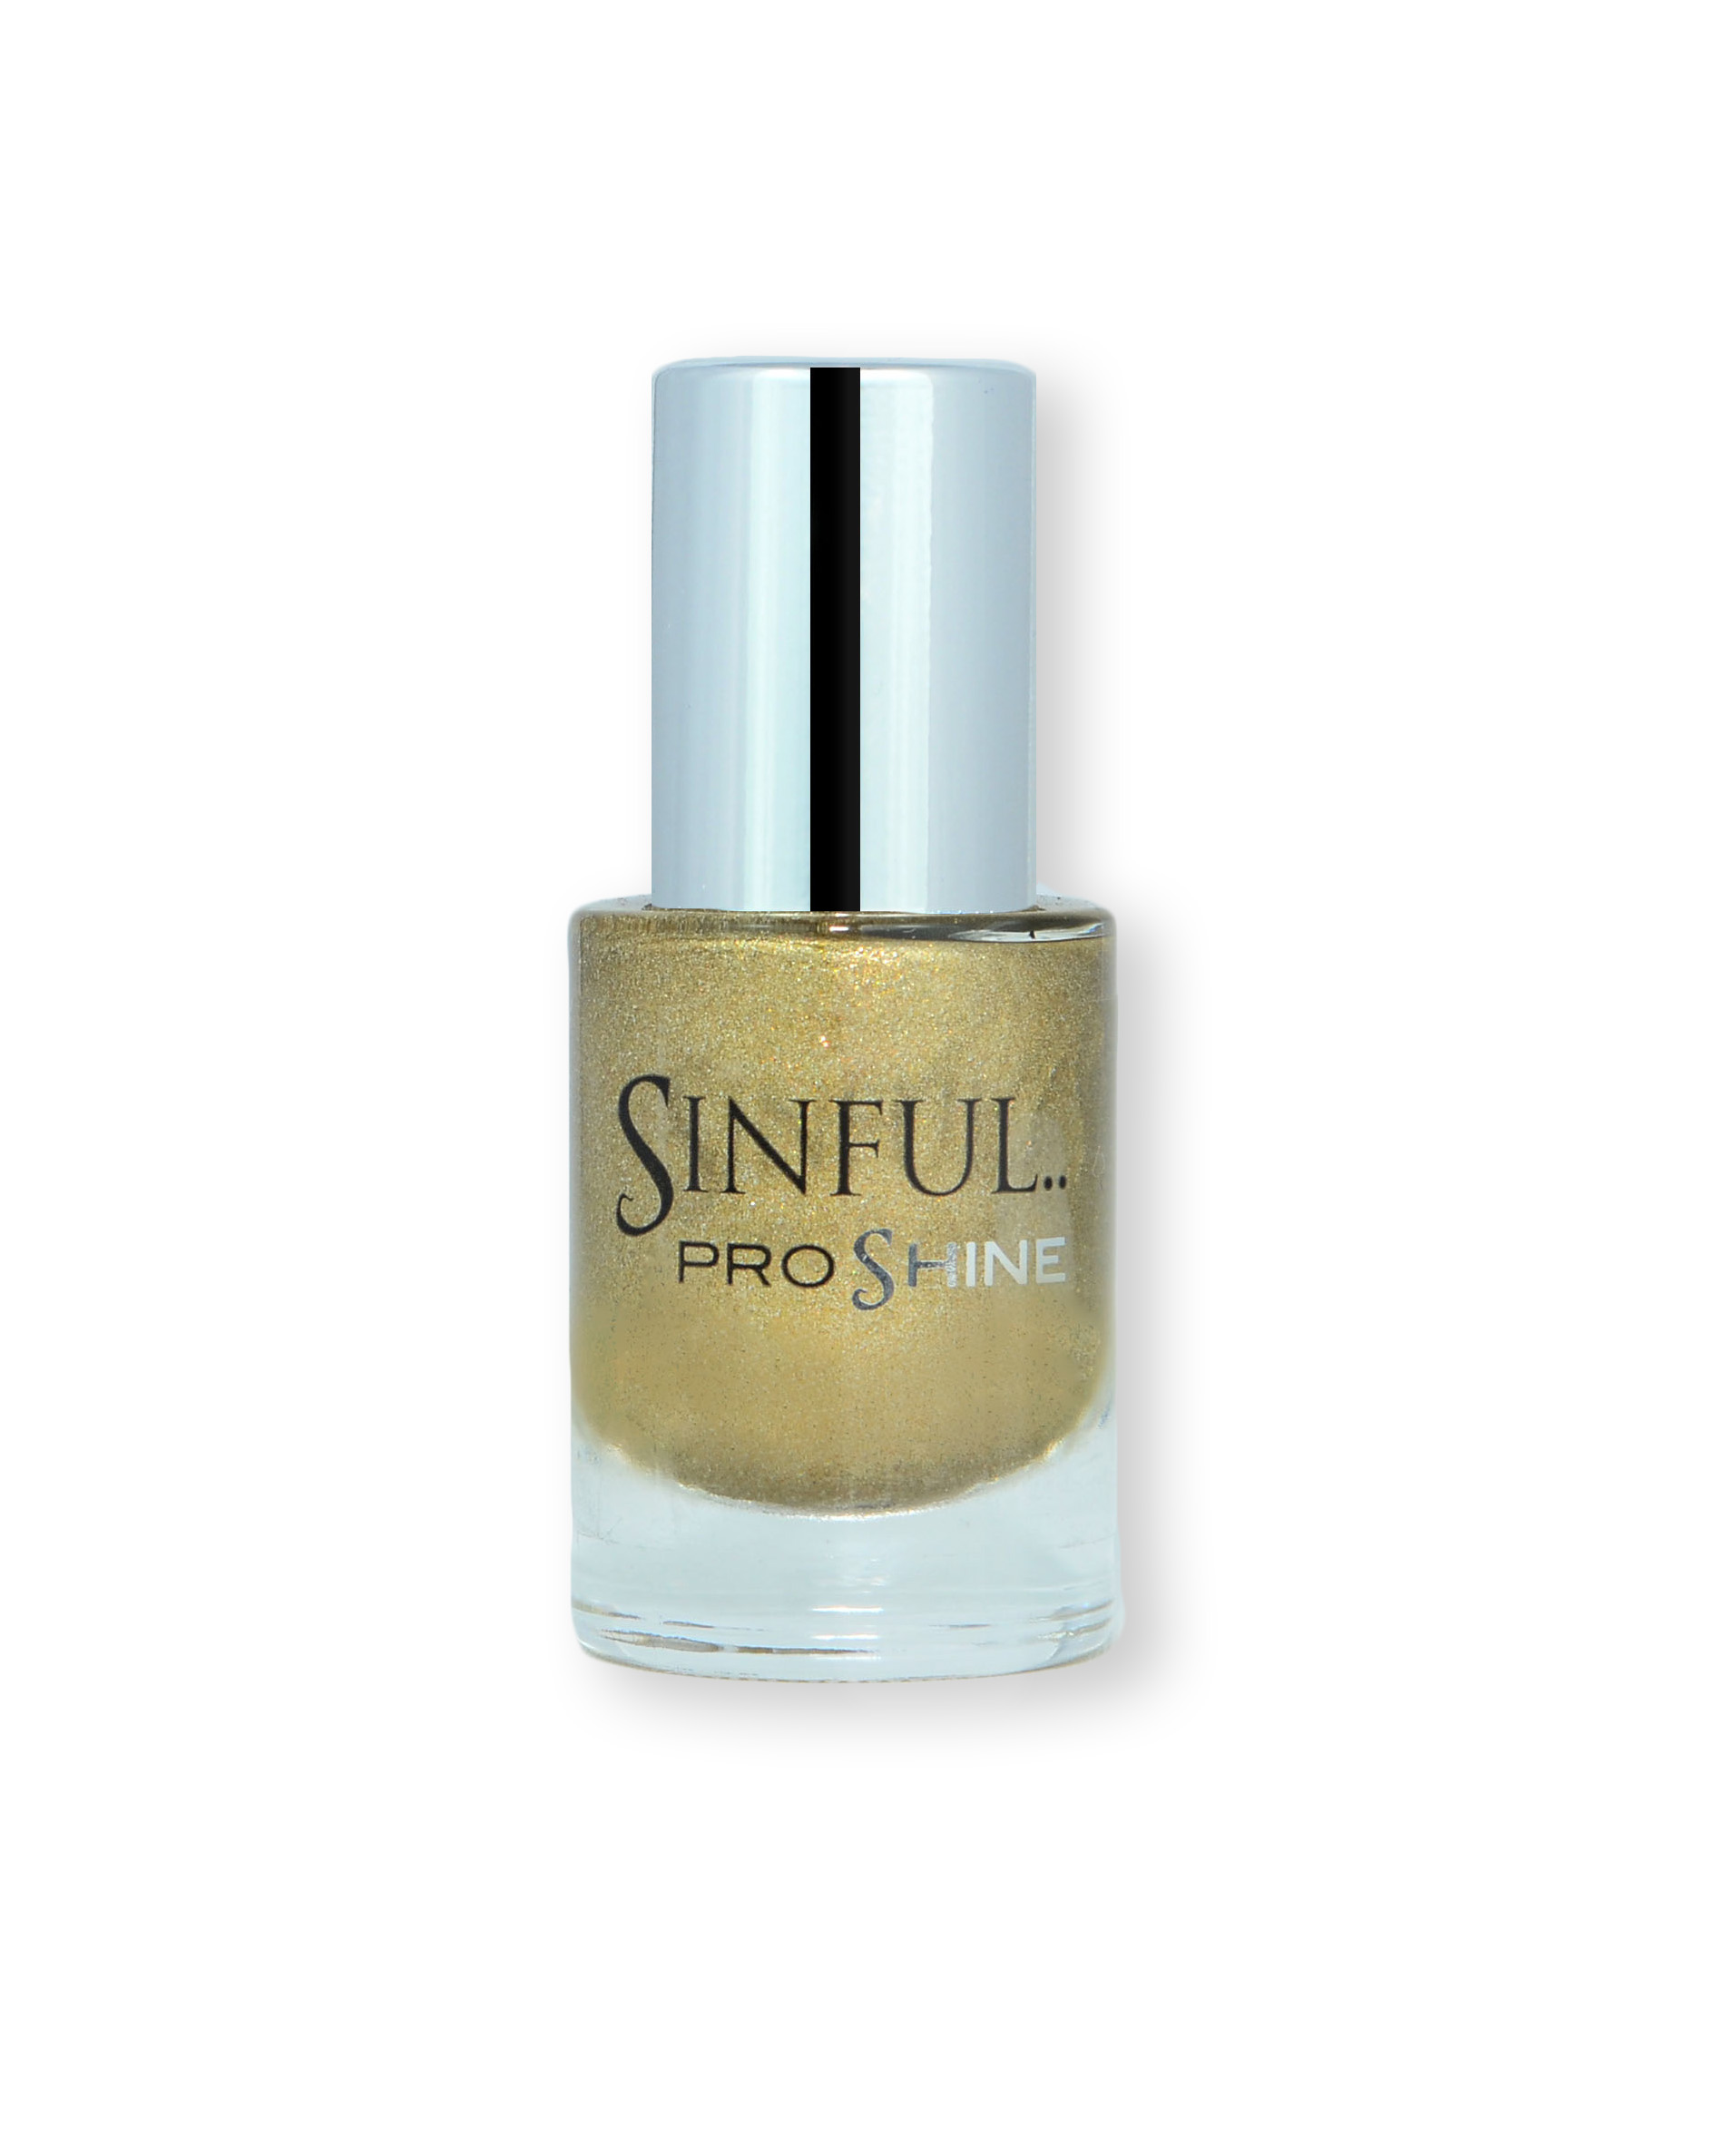 Sinful PROshine is a revolution into top spec imitation gel-like formula, easy application, full coverage and a sleek finish. Spoil yourself with the choice of 42 shades, expertly formulated with the finest grade of pigments. Caviar: Luxurious, dazzling gold